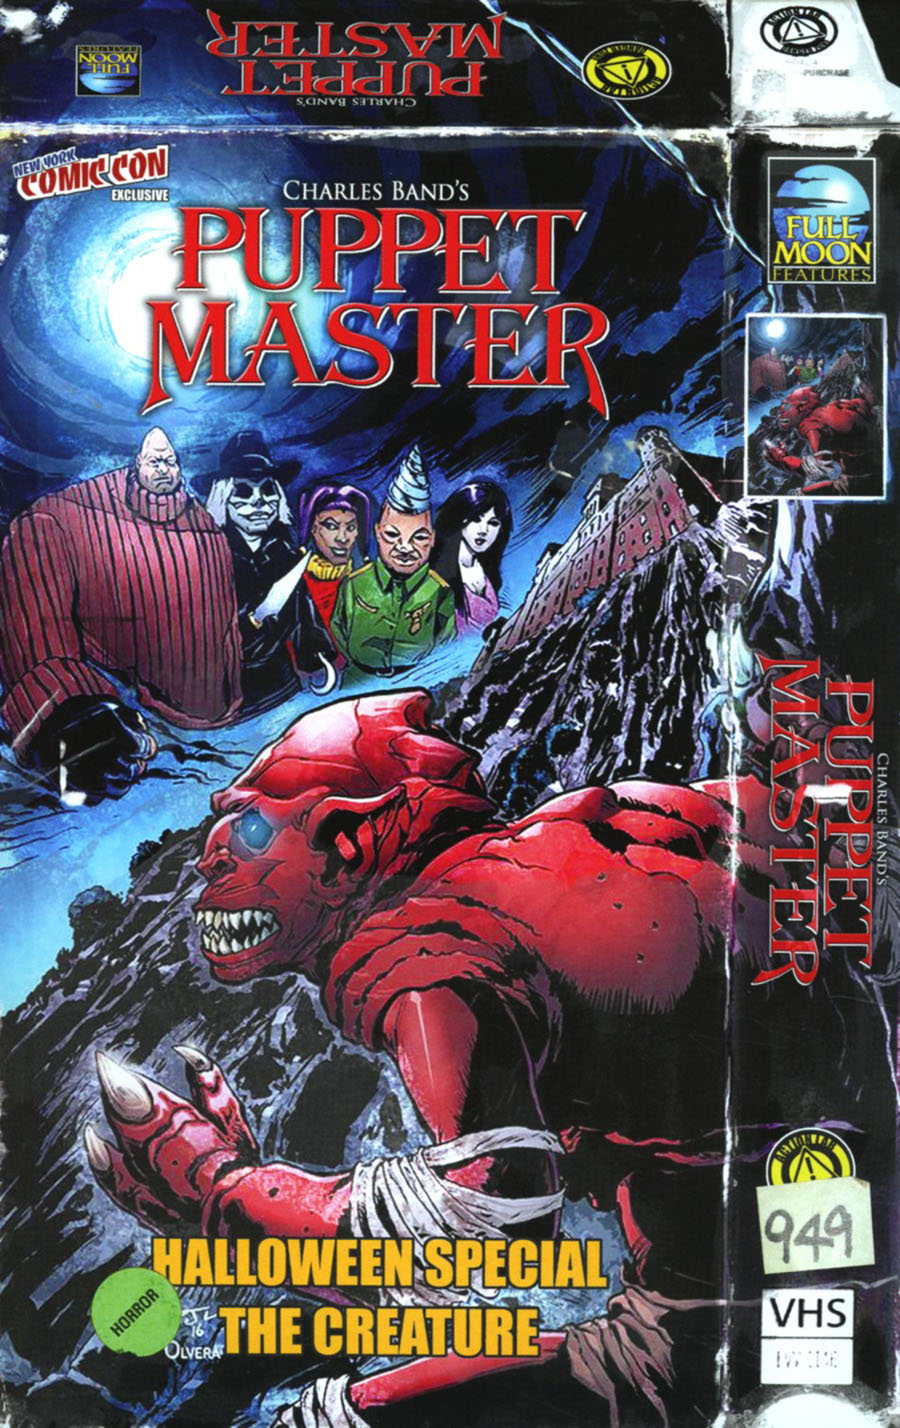 Puppet Master Halloween 1989 Special One Shot Cover E NYCC Exclusive Daniel J Logan VHS Variant Cover